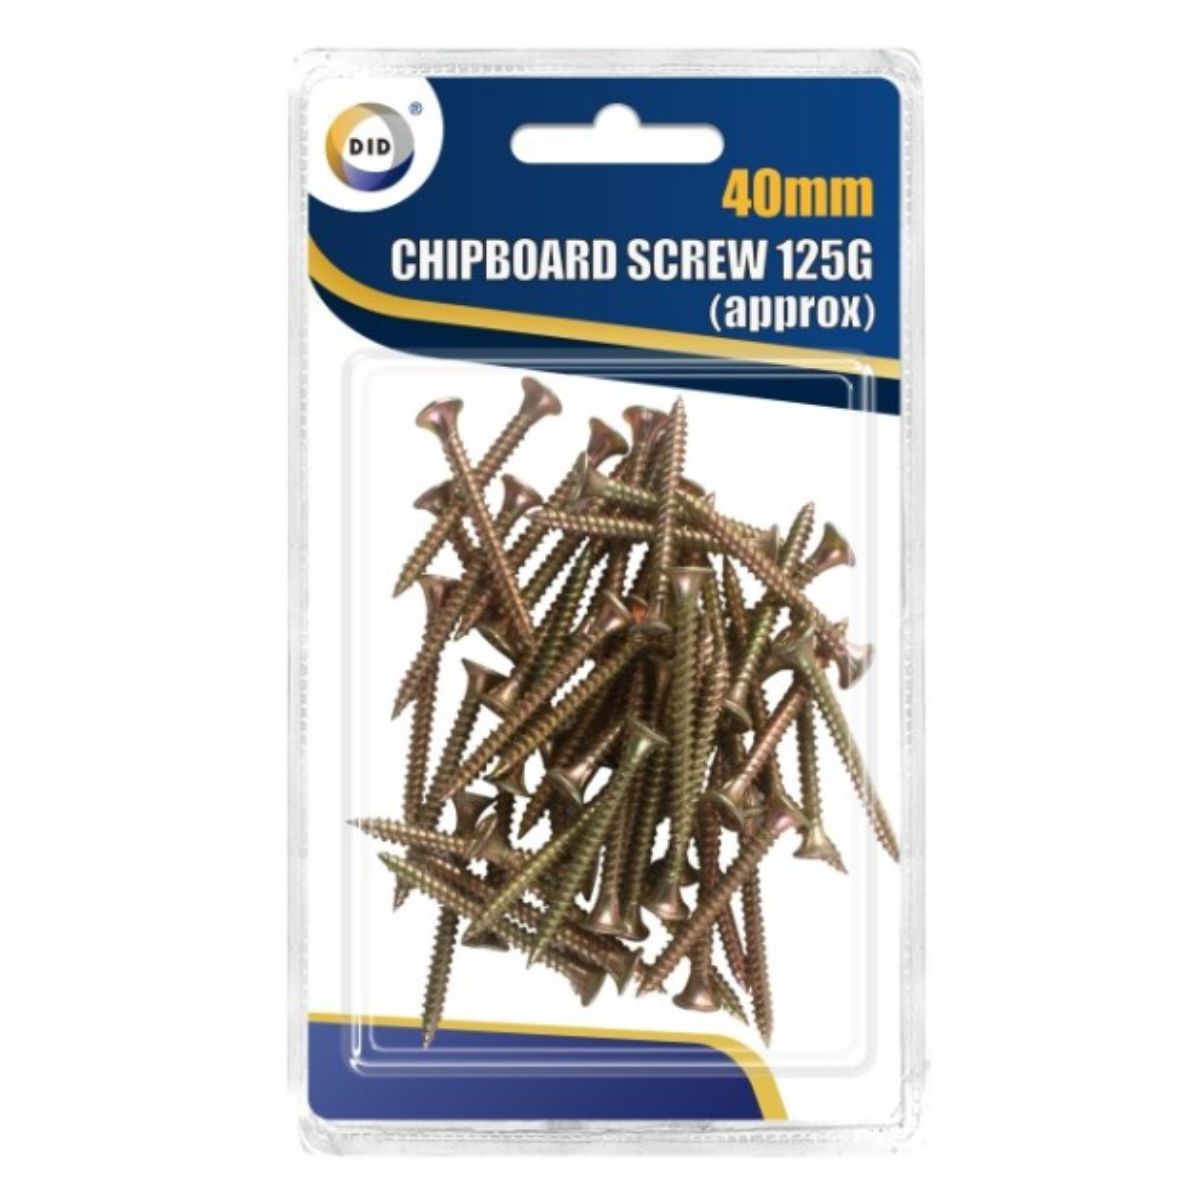 Sentence with replaced product name: Plastic package of DID - 40mm chipboard screws - 125g, containing approximately 125 pieces, displayed against a blue and yellow label.